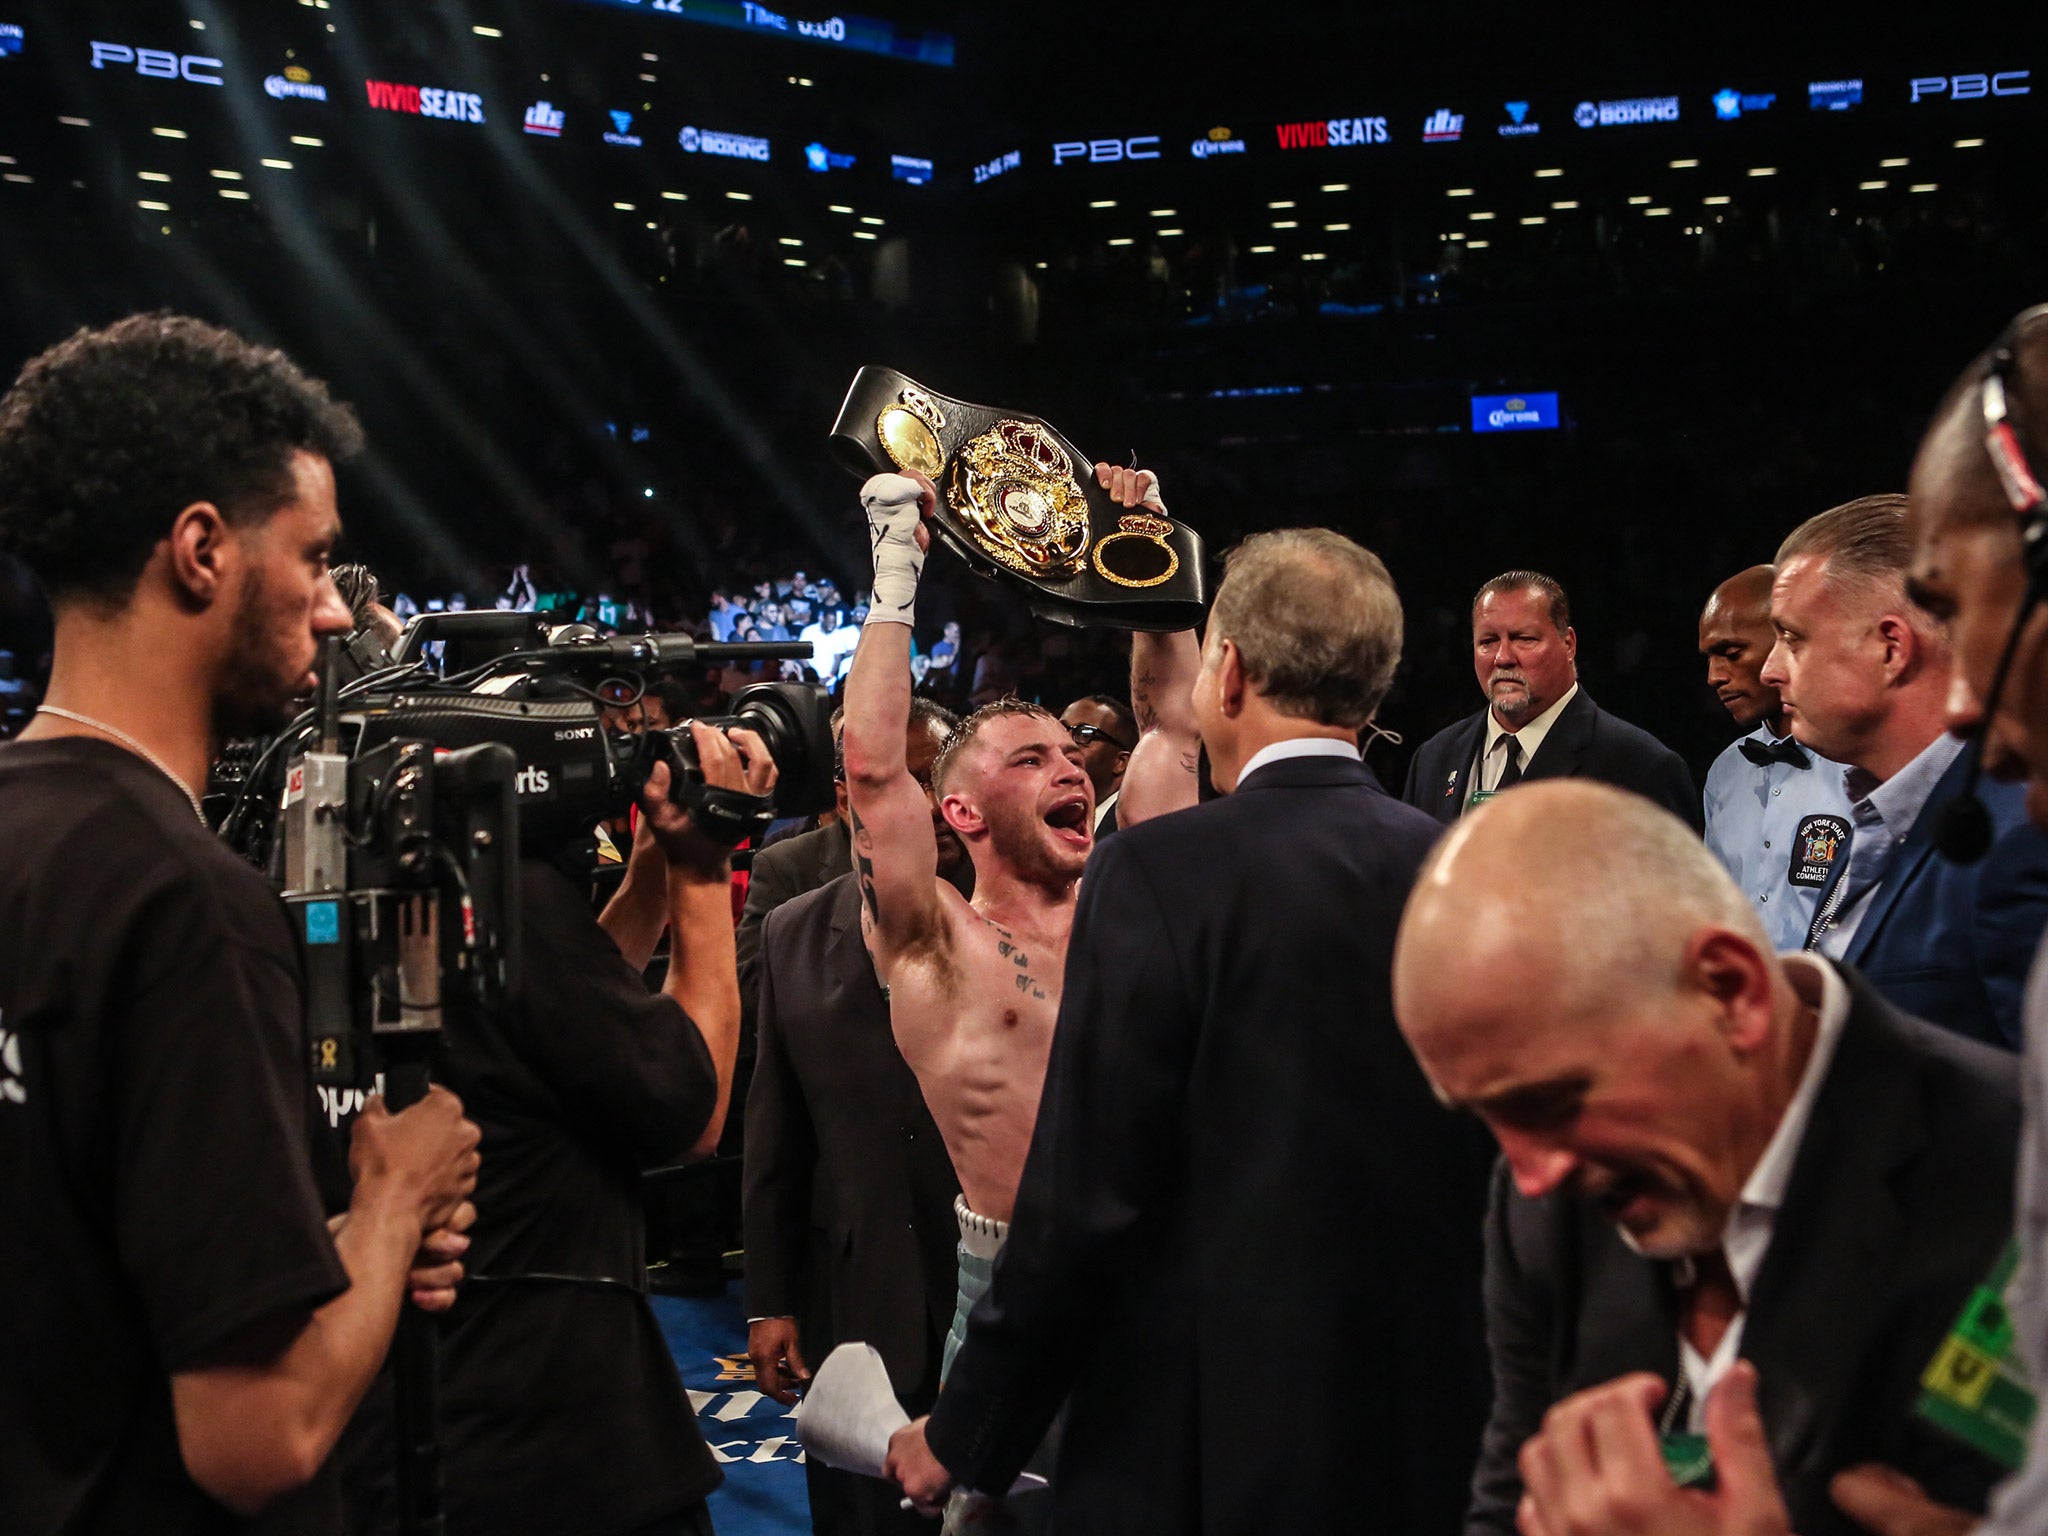 Carl Frampton lifts the WBA featherweight title after defeating Leo Santa Cruz by majority decision